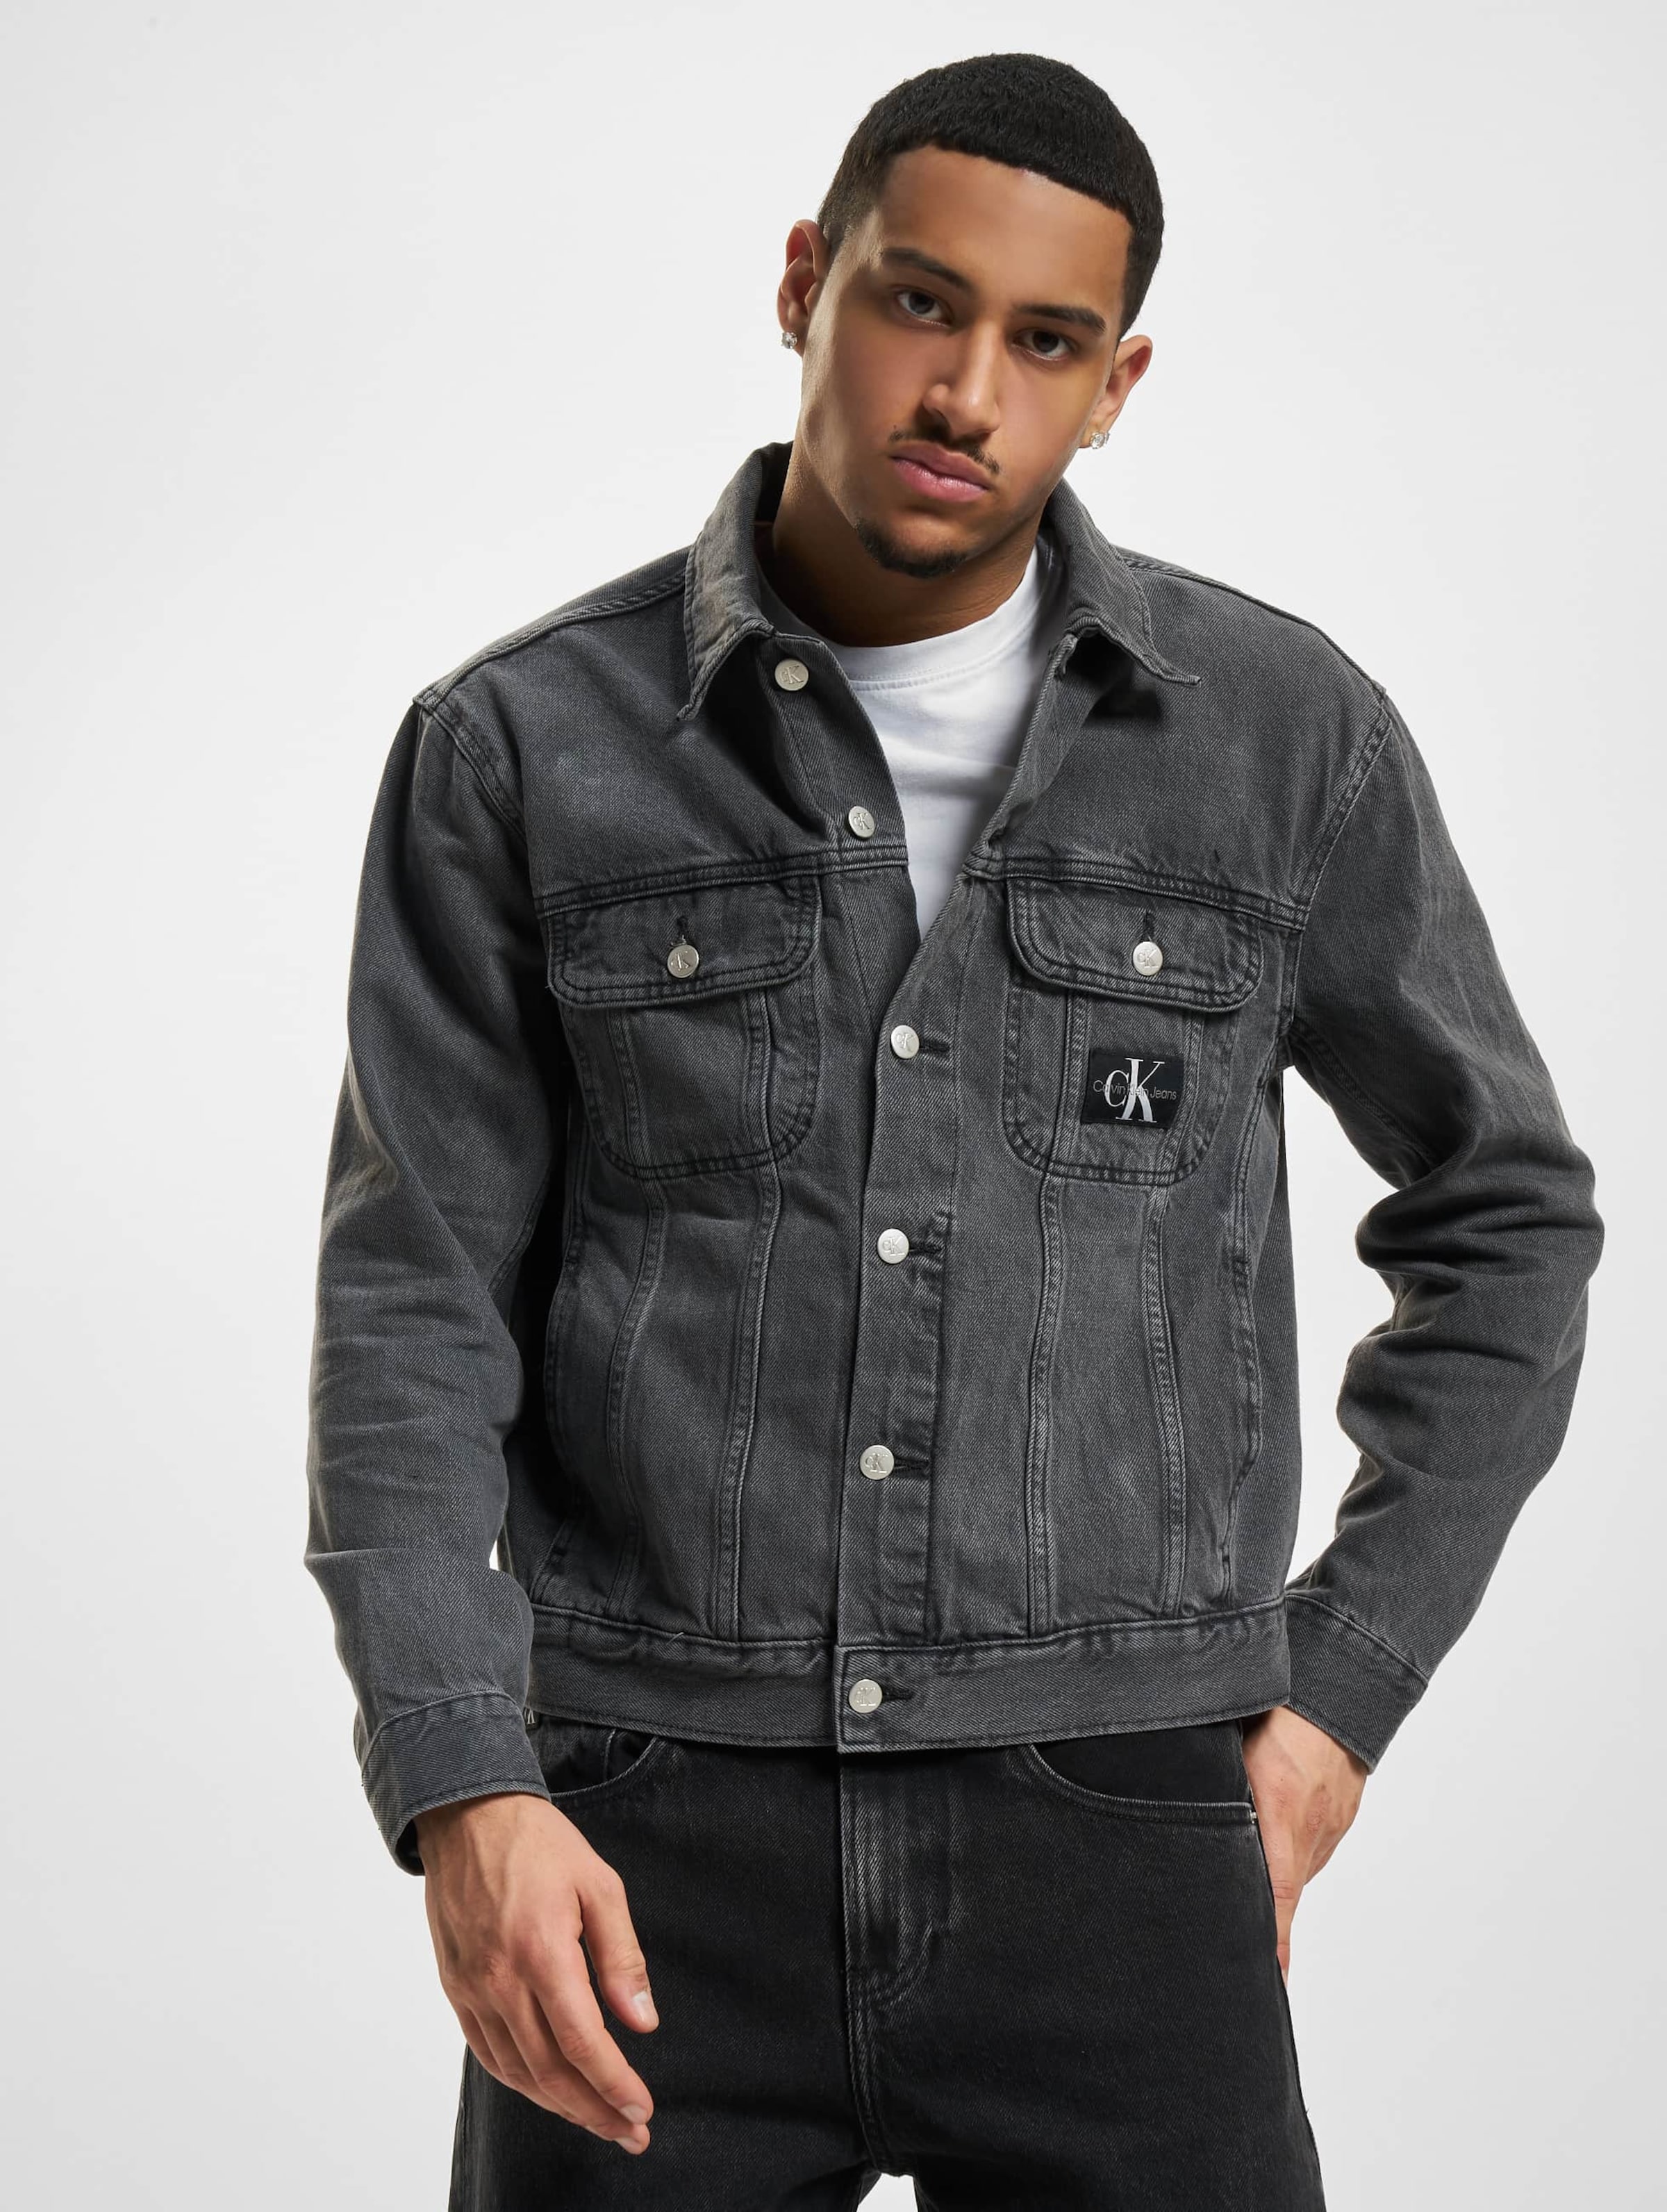 Black denim jacket with black tee, dark blue jeans, black shoes. Almost  always a fan of black and blue.… | Black denim jacket outfit, Denim jacket  men, Mens outfits